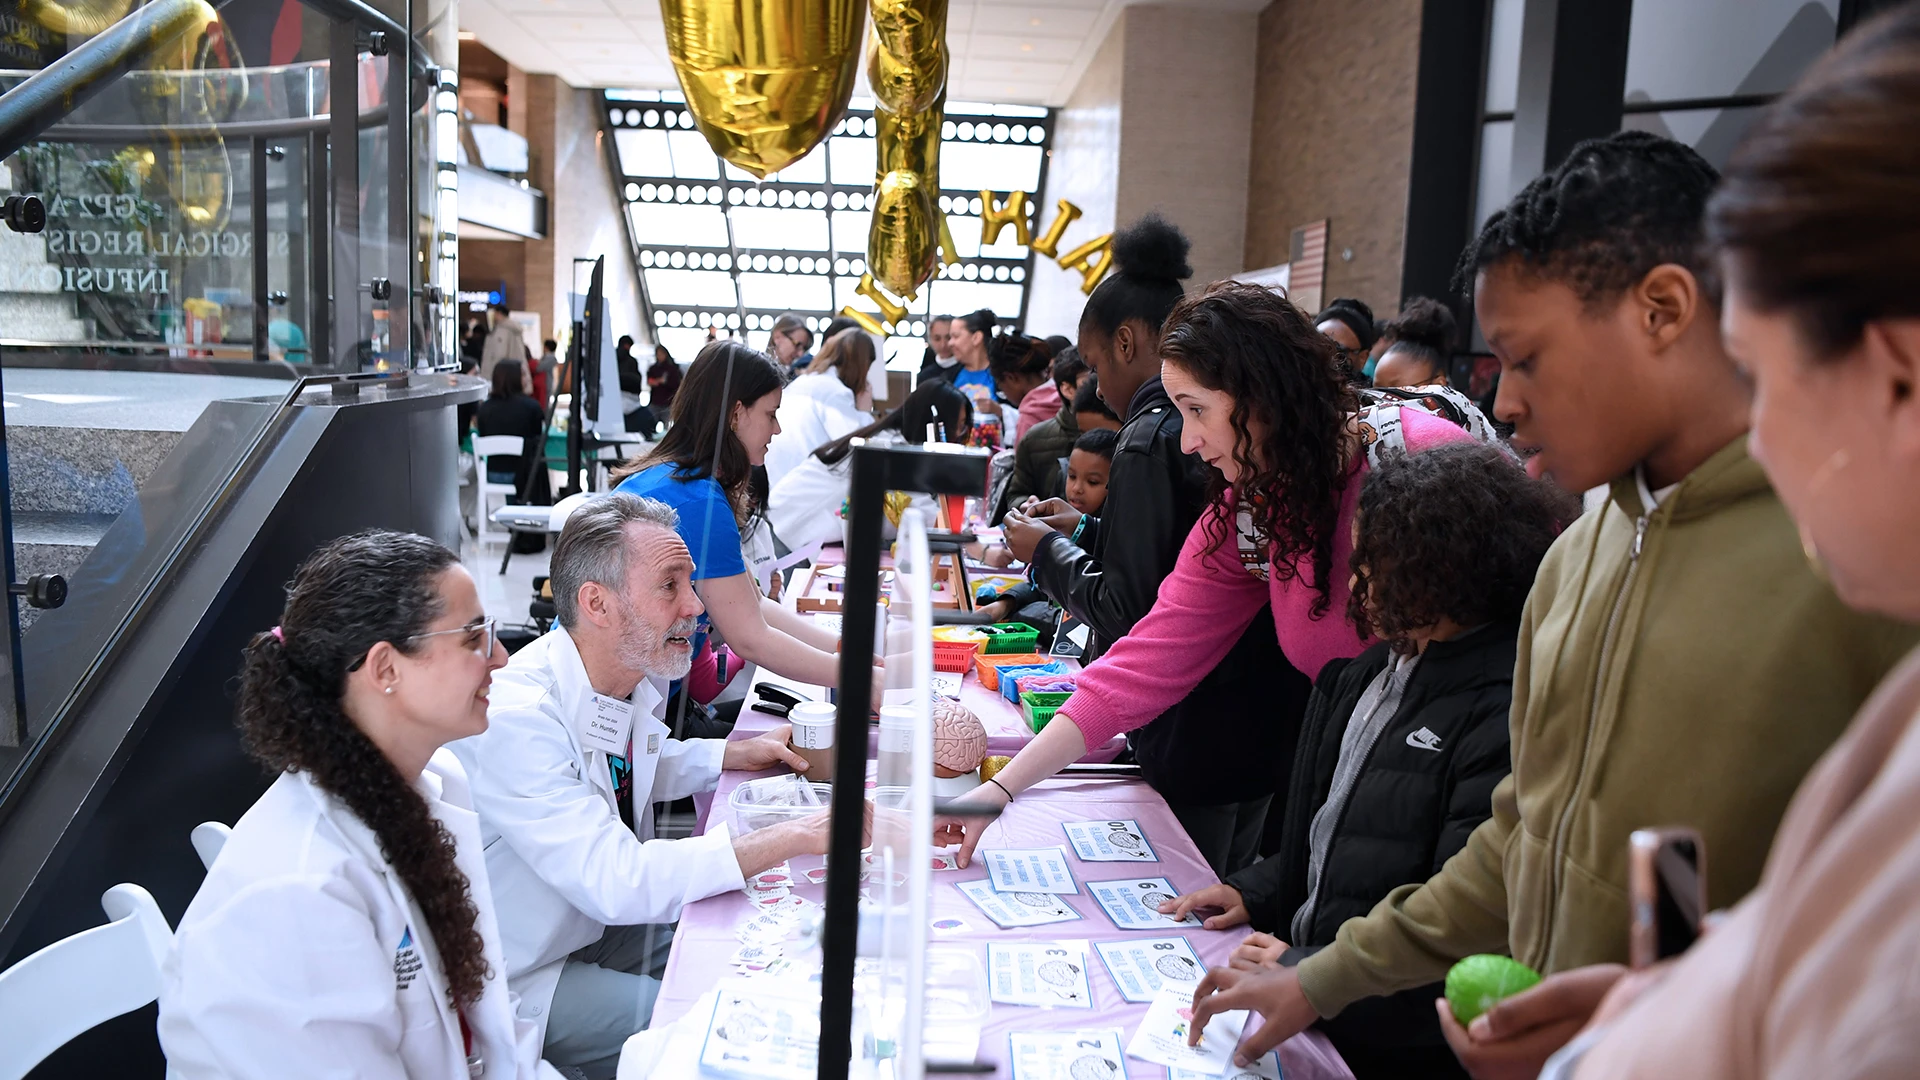 At the Meet the Experts booth, visitors to the Brain Fair could ask faculty members challenging questions about the brain. Faculty volunteers included Hala Harony-Nicolas, PhD, Associate Professor of Neuroscience, and Psychiatry, and George Huntley, PhD, Professor of Neuroscience.